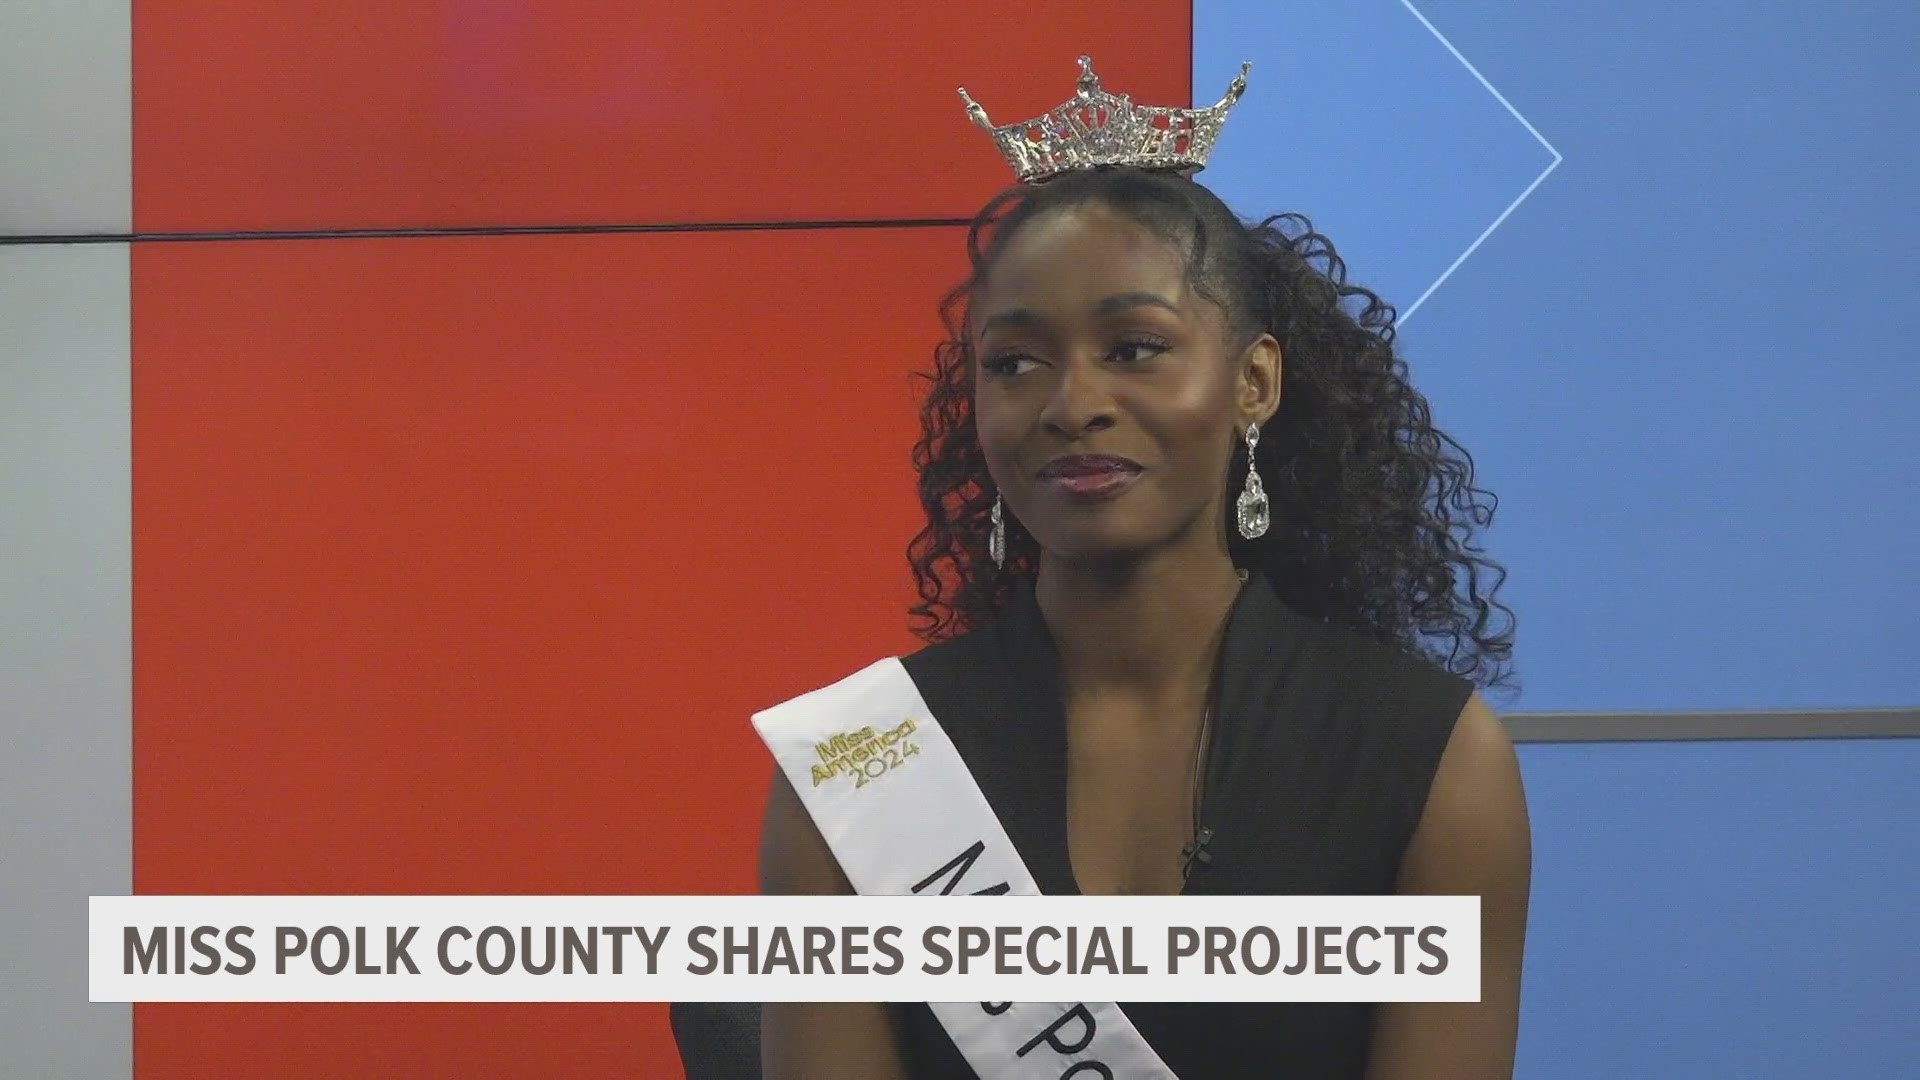 Aside from being a fierce track and field athlete, Miss Polk County is a passionate advocate for the community.